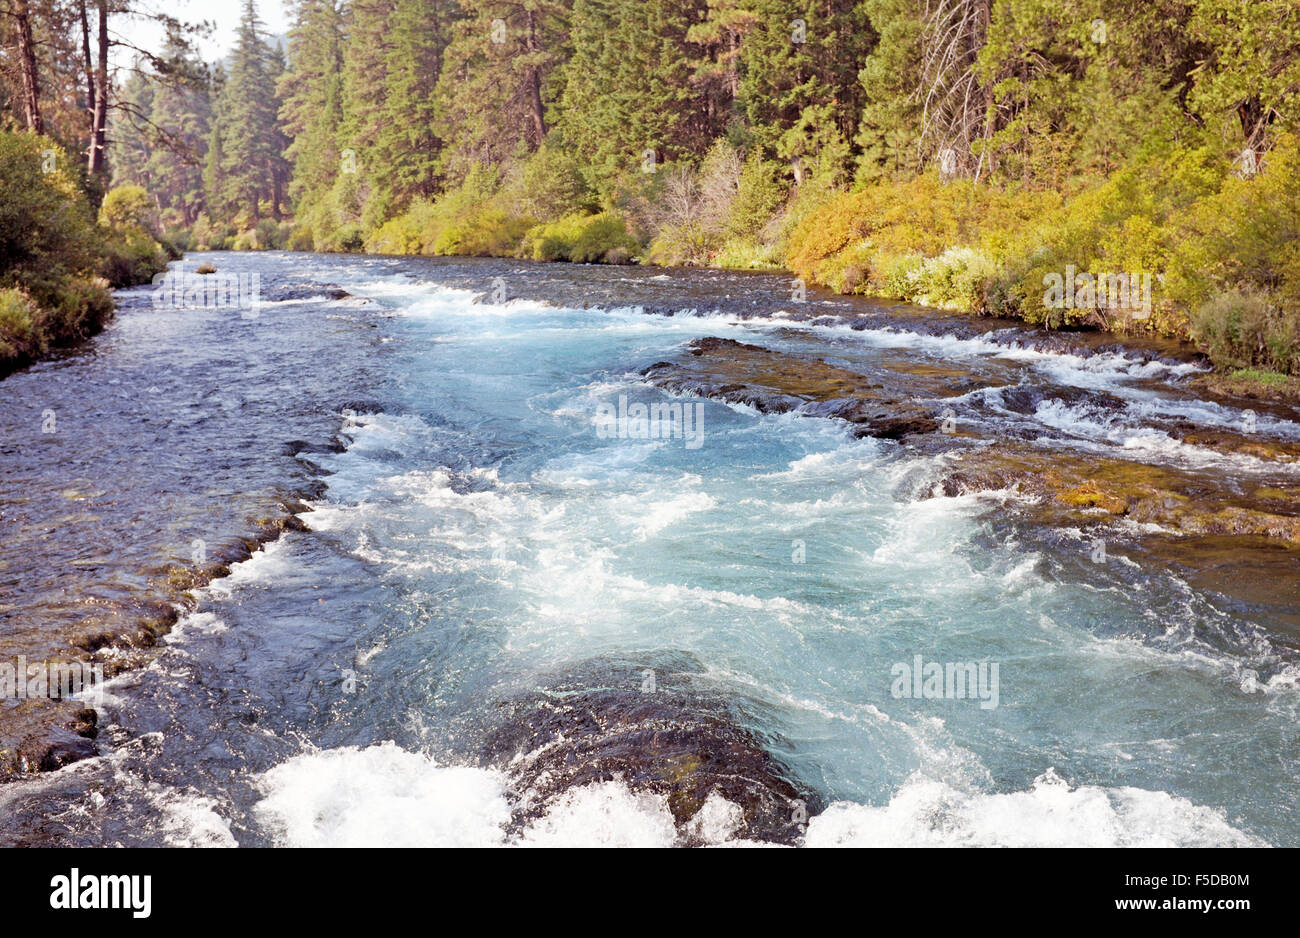 The Metolius River in the Cascade Mountains of central oregon near the resort town of Sisters, Oregon Stock Photo